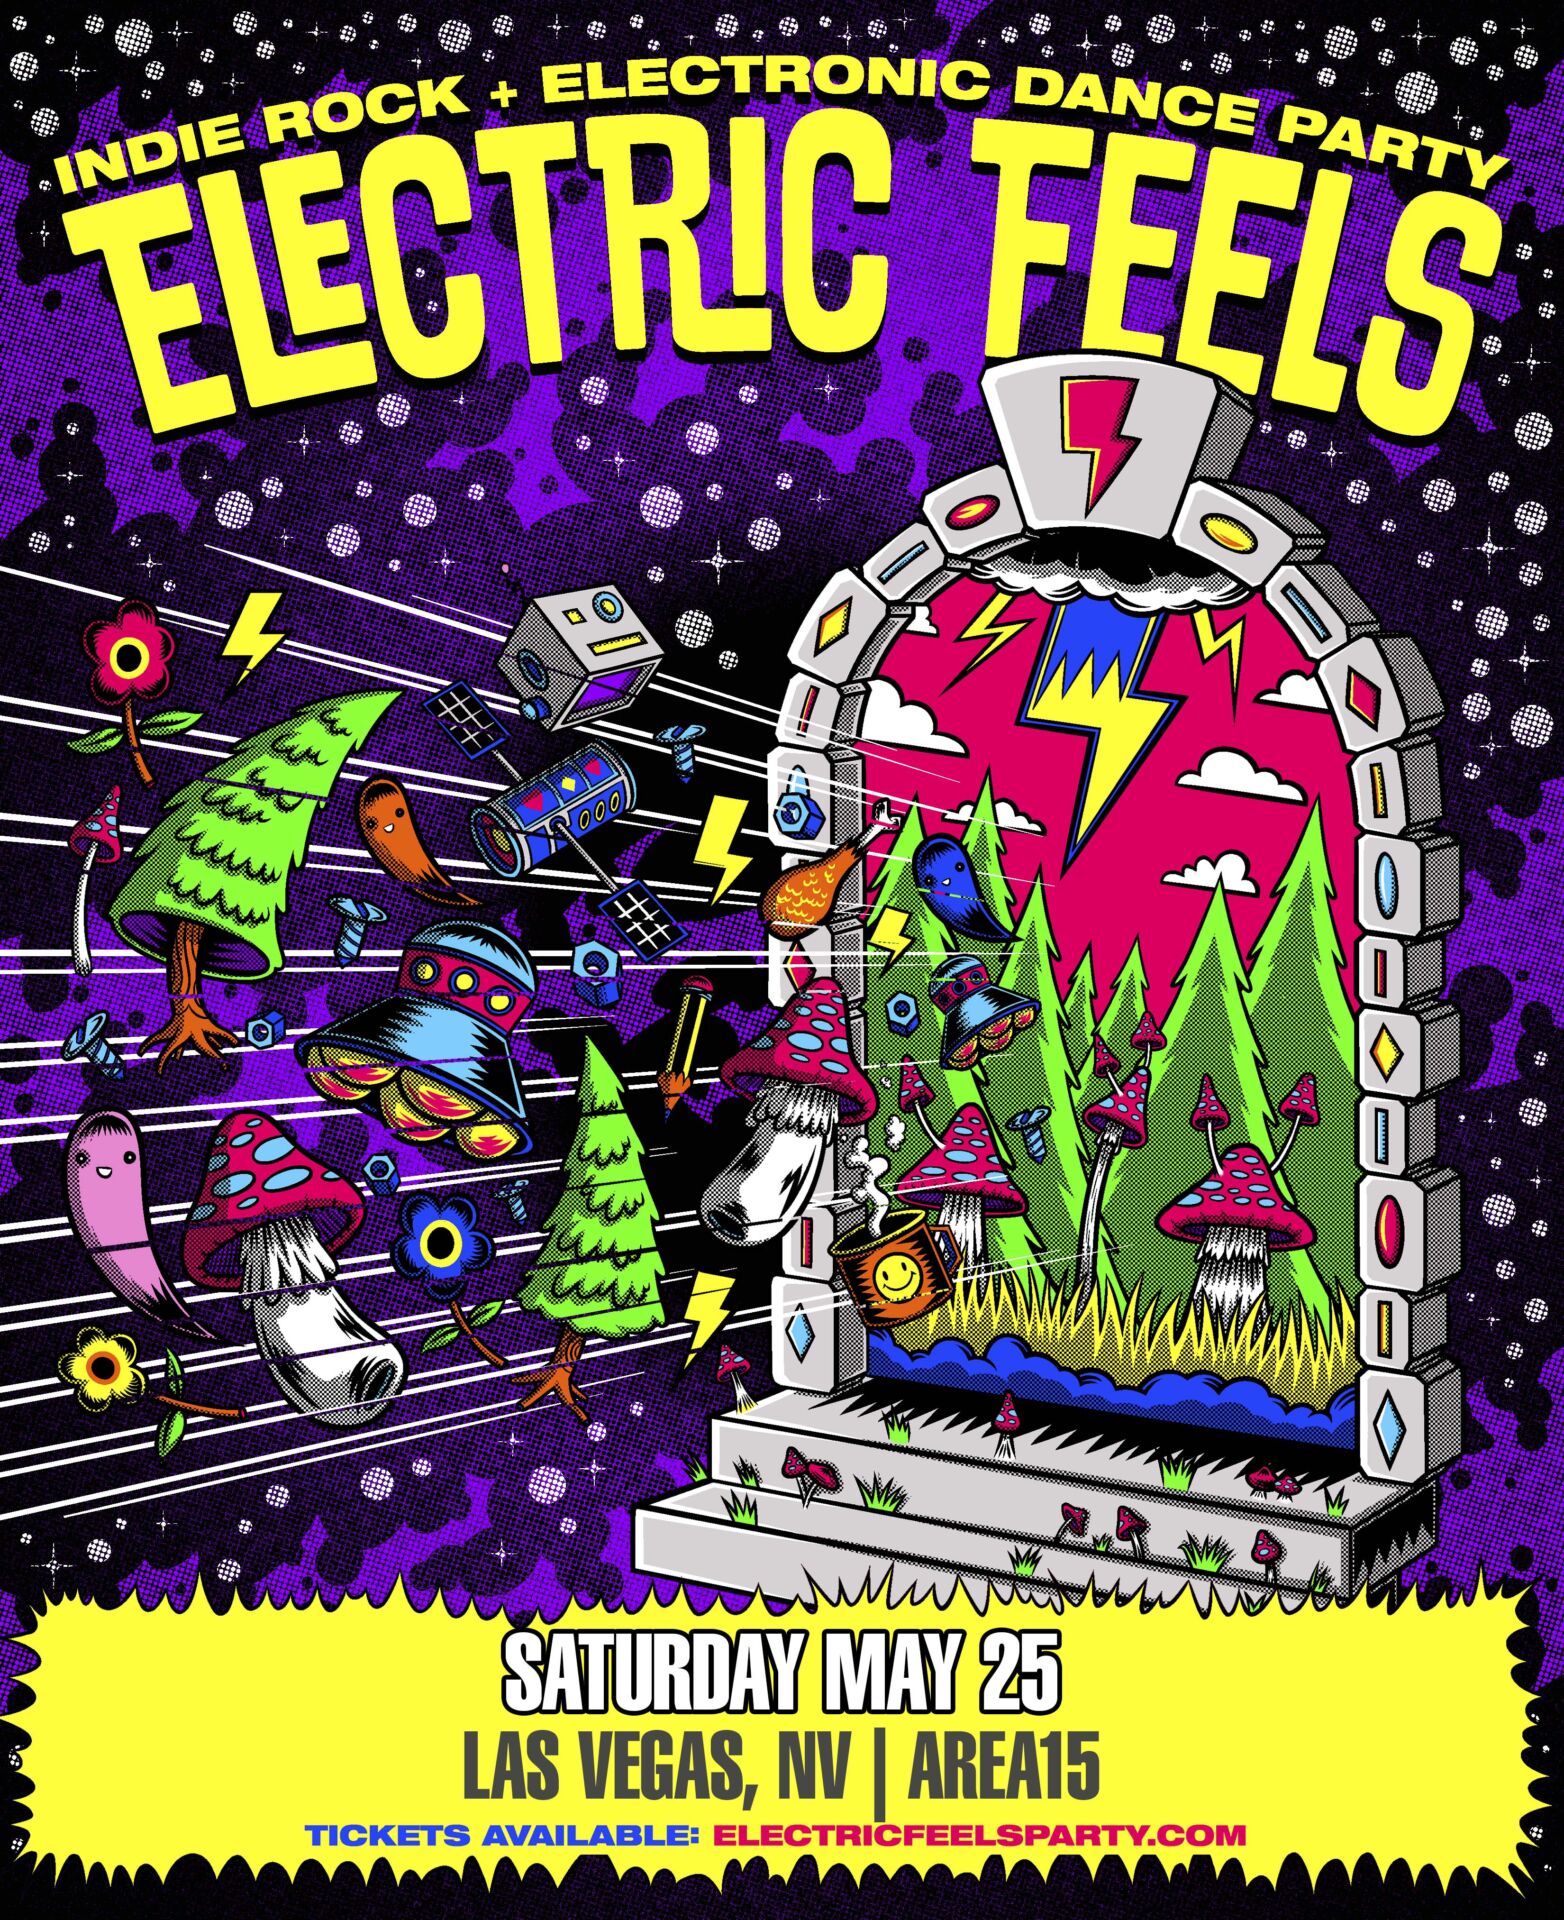 Electric Feels at AREA15